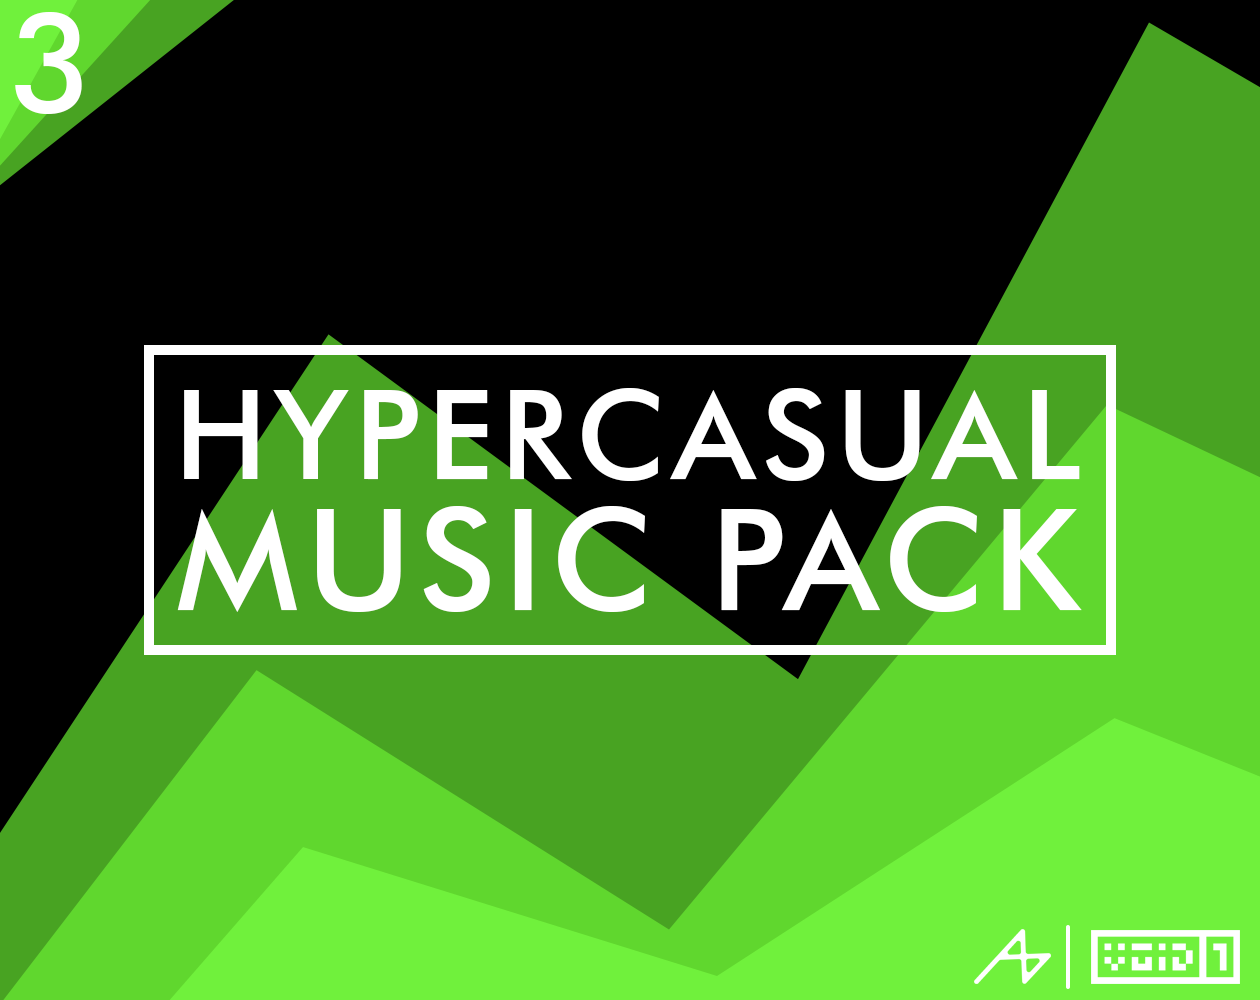 Download the Hyper Casual Music Pack Now !!